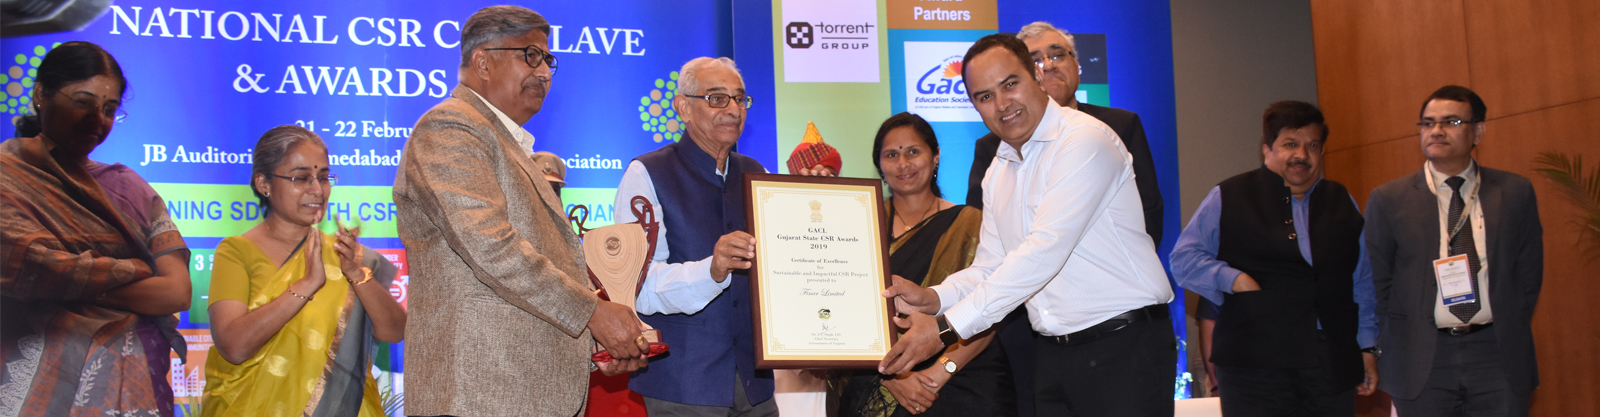 National CSR Conclave and Awards 2019